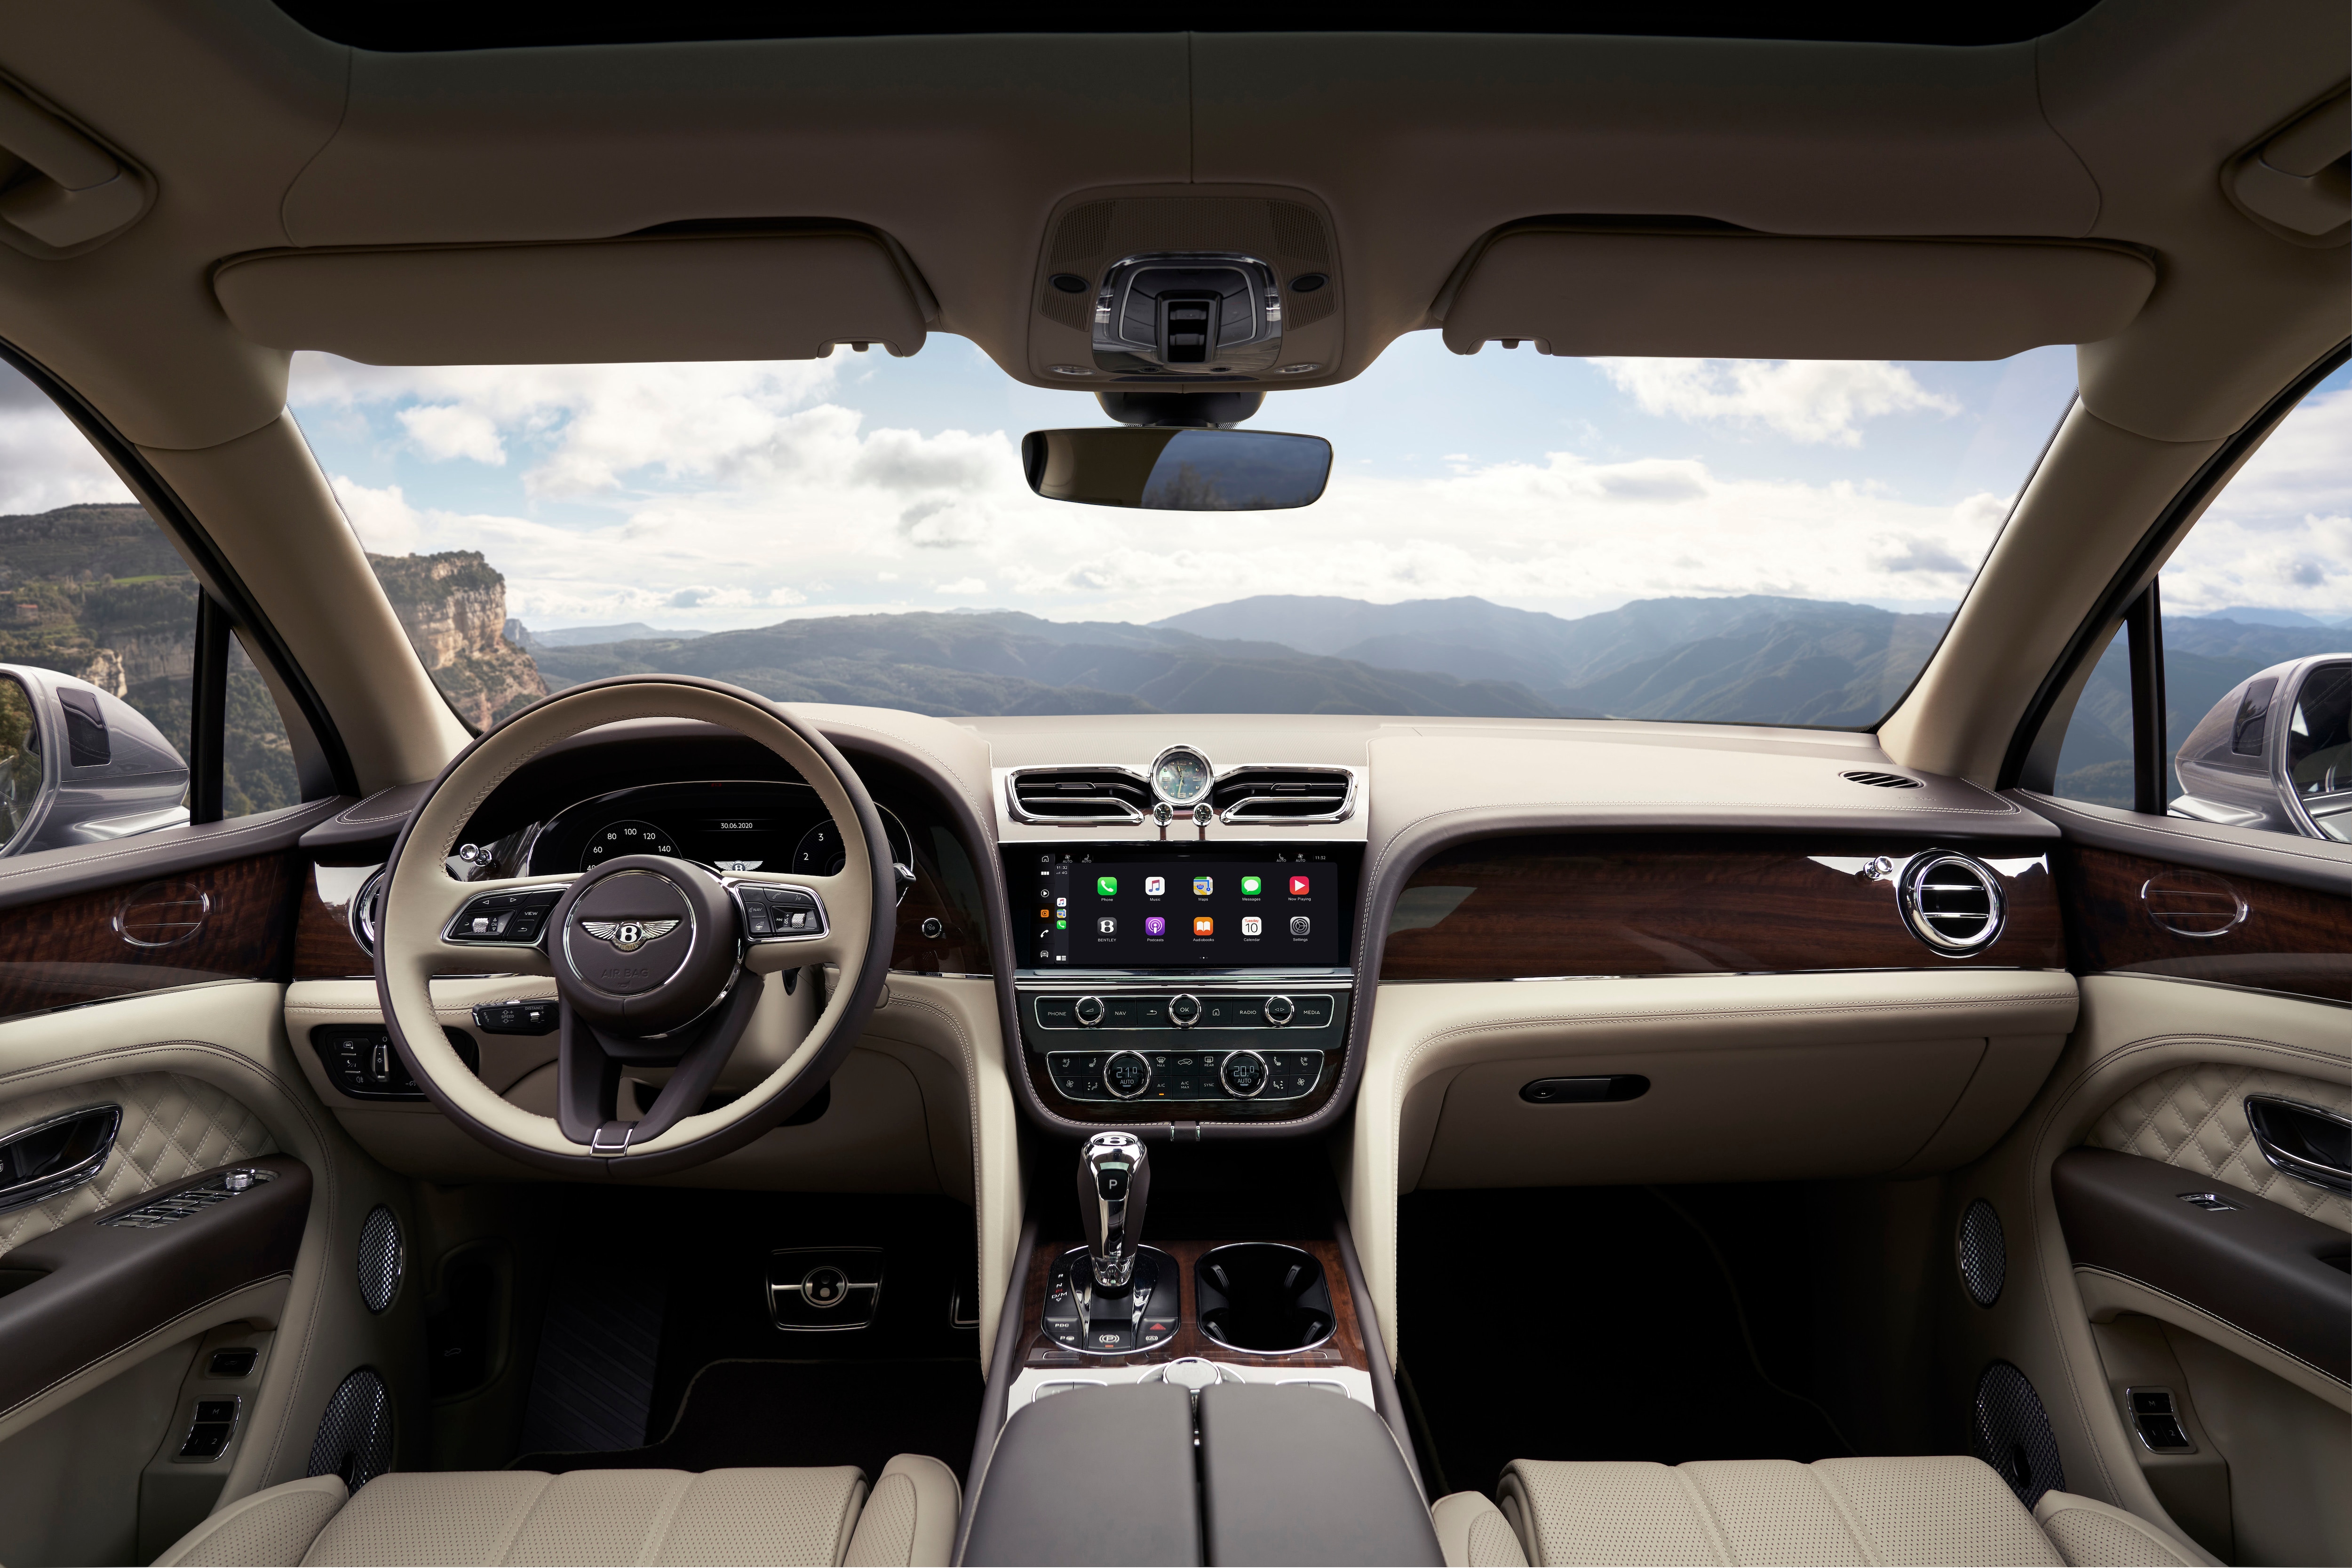 A new infotainment system with a 10.9-inch display screen sits on the the handcrafted Bentley dashboard design.